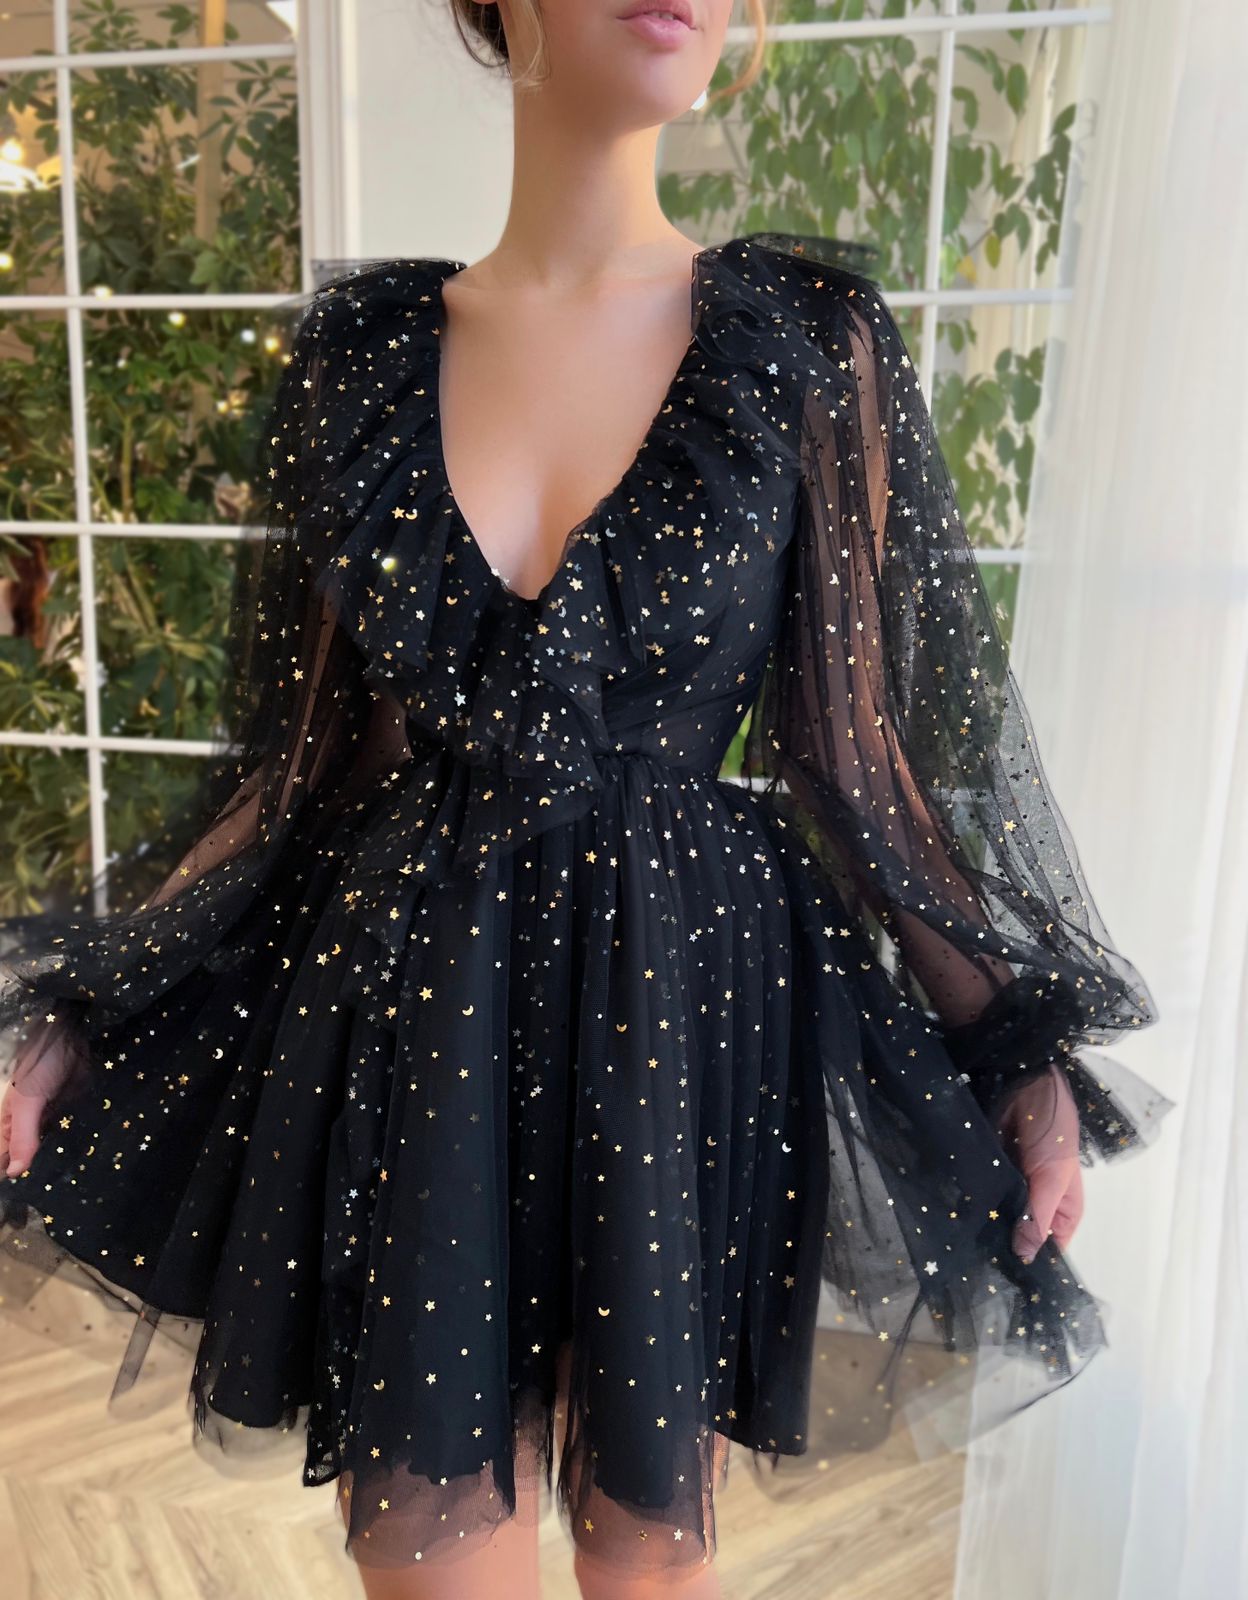 Black mini dress with long sleeves and starry fabric